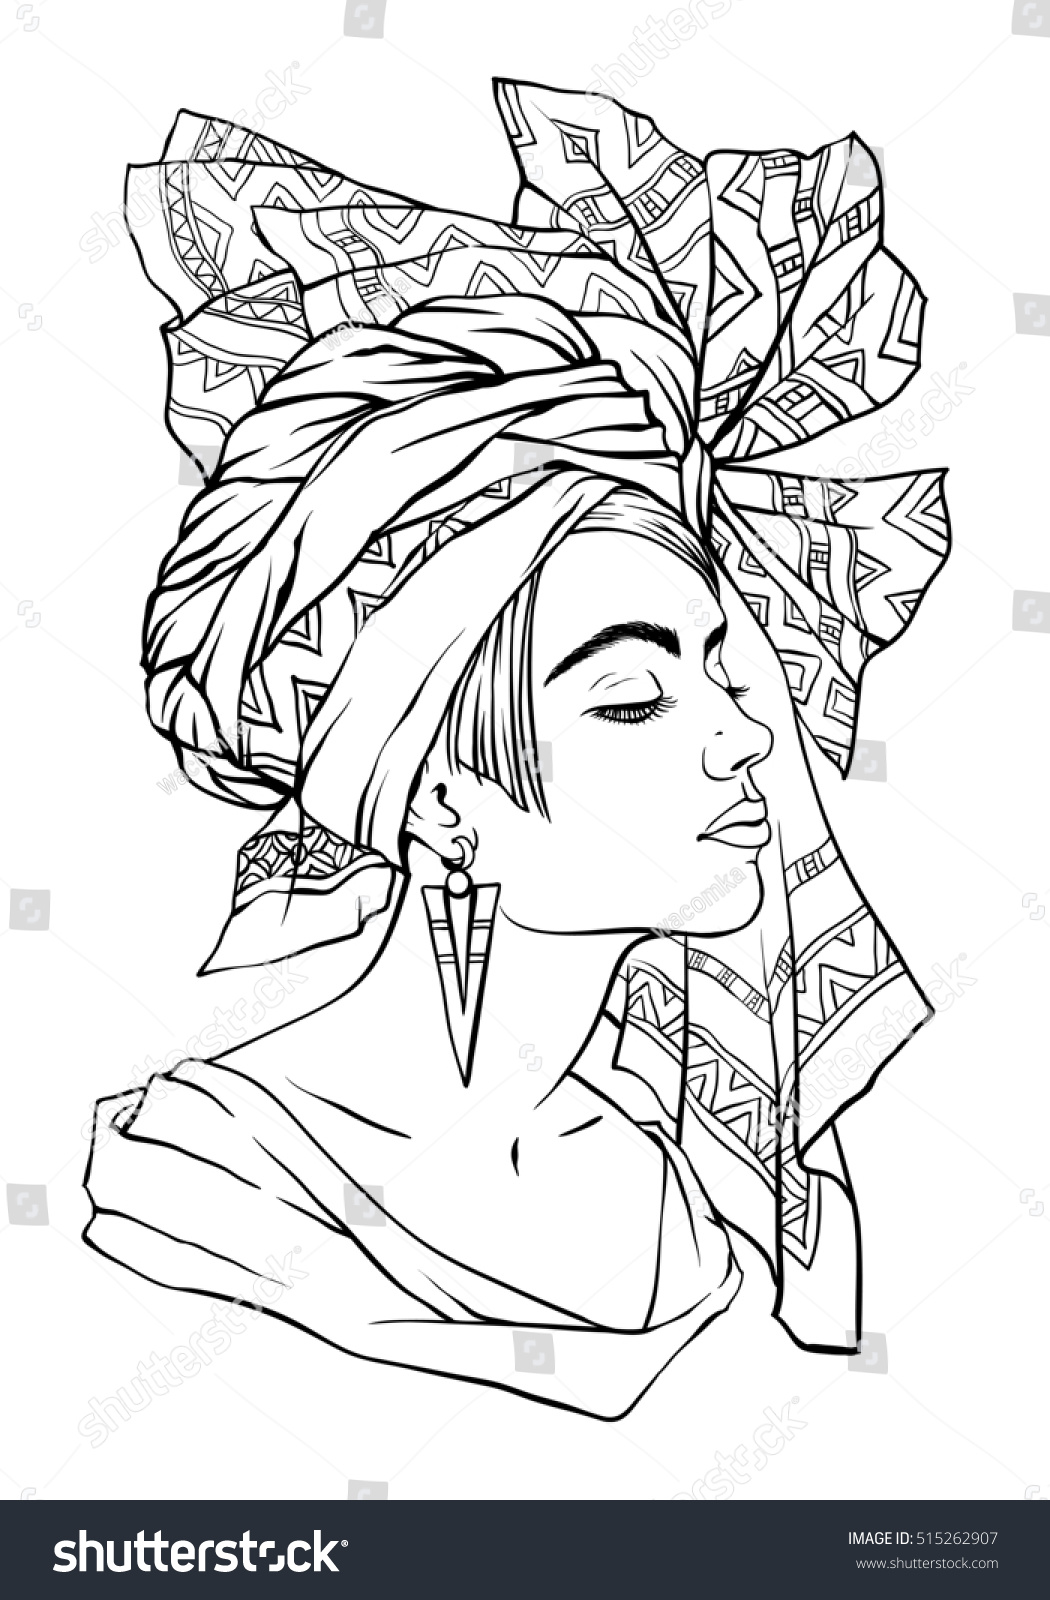 Download Vector Fashion Illustration Beautiful Young Woman Stock Vector 515262907 - Shutterstock